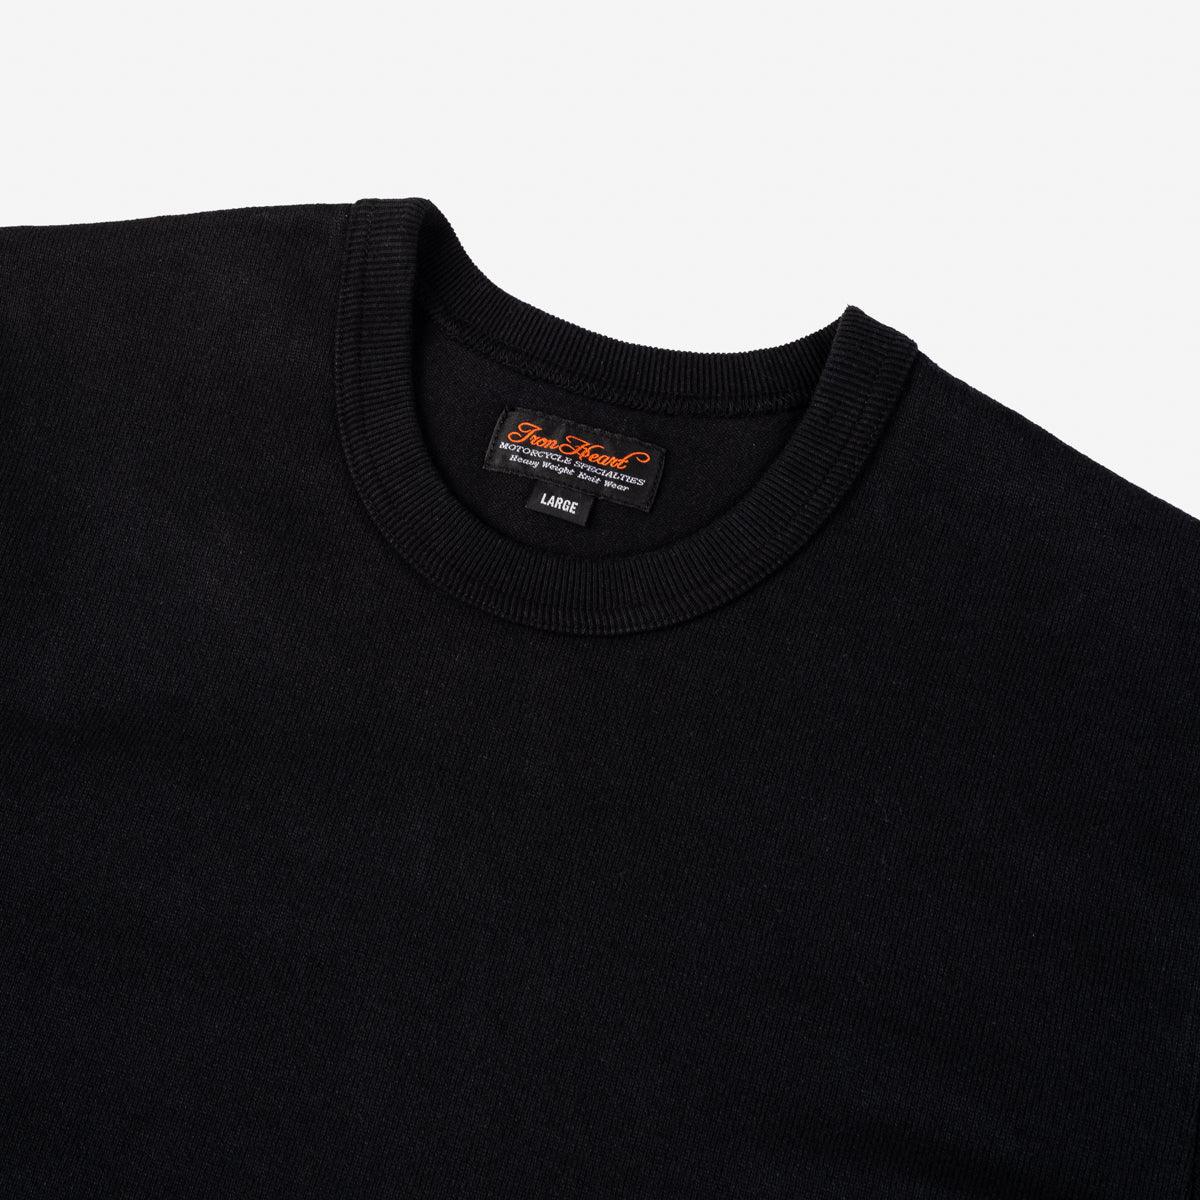 Image showing the IHT-1600-BLK - 11oz Crew Neck T-Shirt - Black which is a T-Shirts described by the following info Iron Heart, Released, T-Shirts, Tops and sold on the IRON HEART GERMANY online store